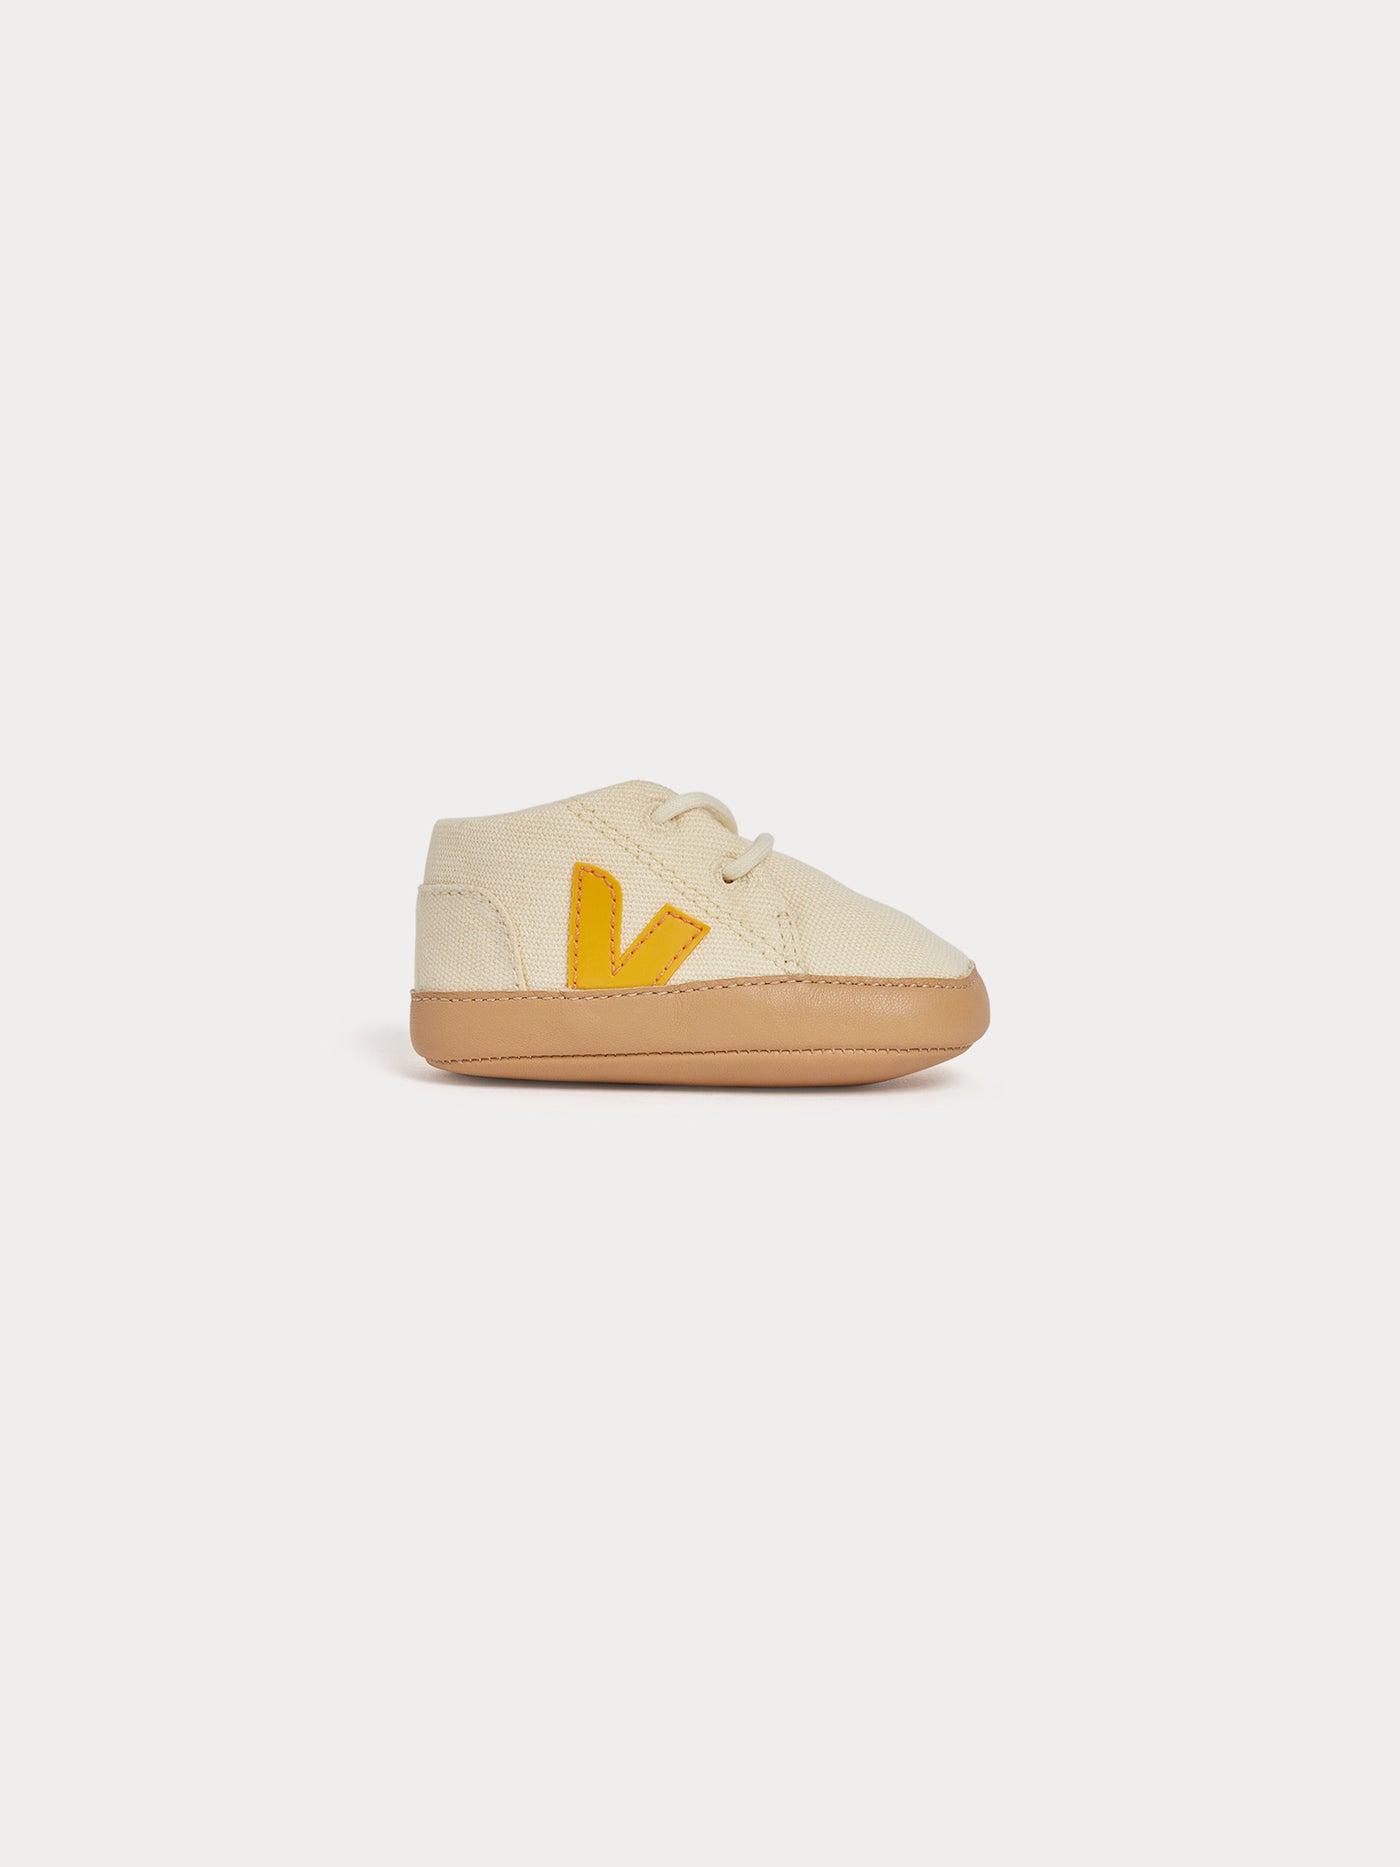 Bonpoint x Veja Baby Sneakers IVORY